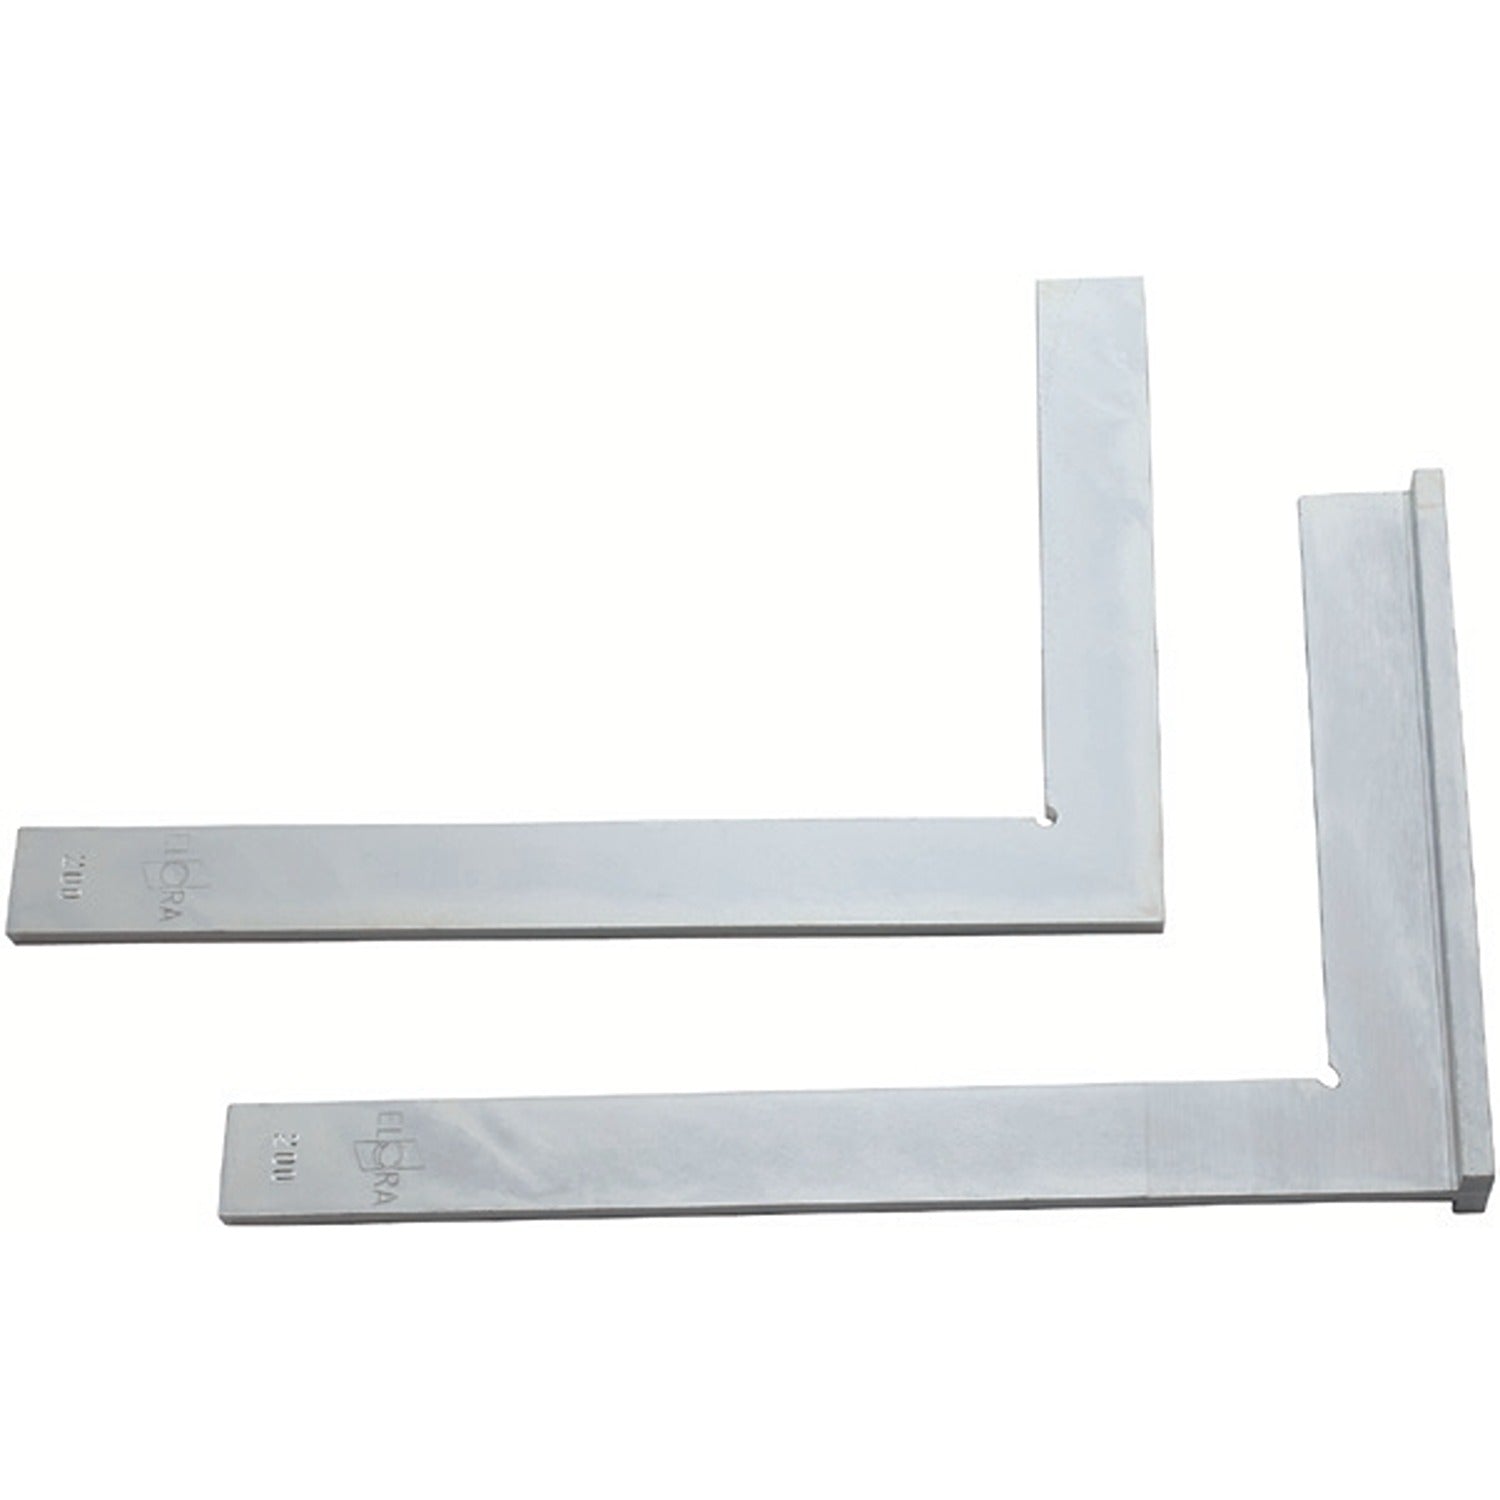 ELORA 1571 Engineer Steel Square (ELORA Tools) - Premium Square from ELORA - Shop now at Yew Aik.